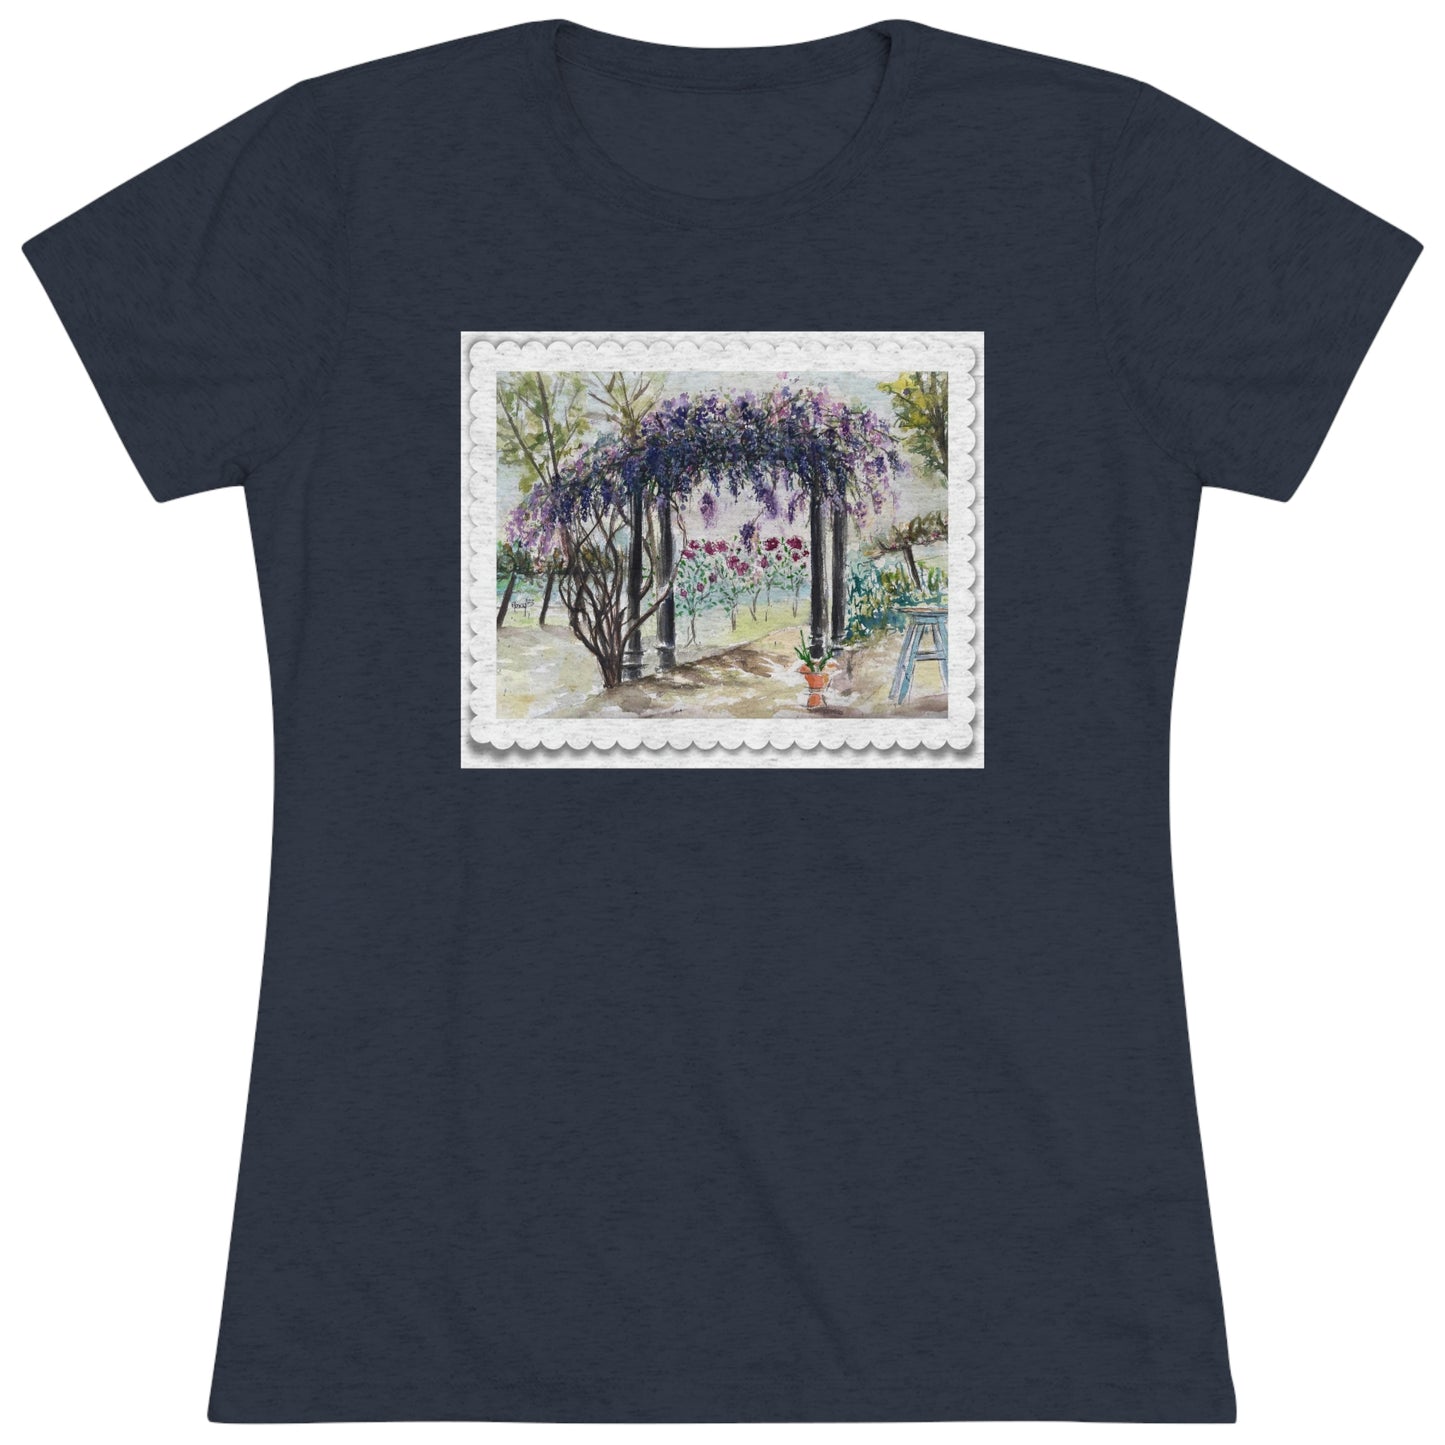 Wisteria at Somerset (Scalloped edge frame) Women's fitted Triblend Tee  tee shirt